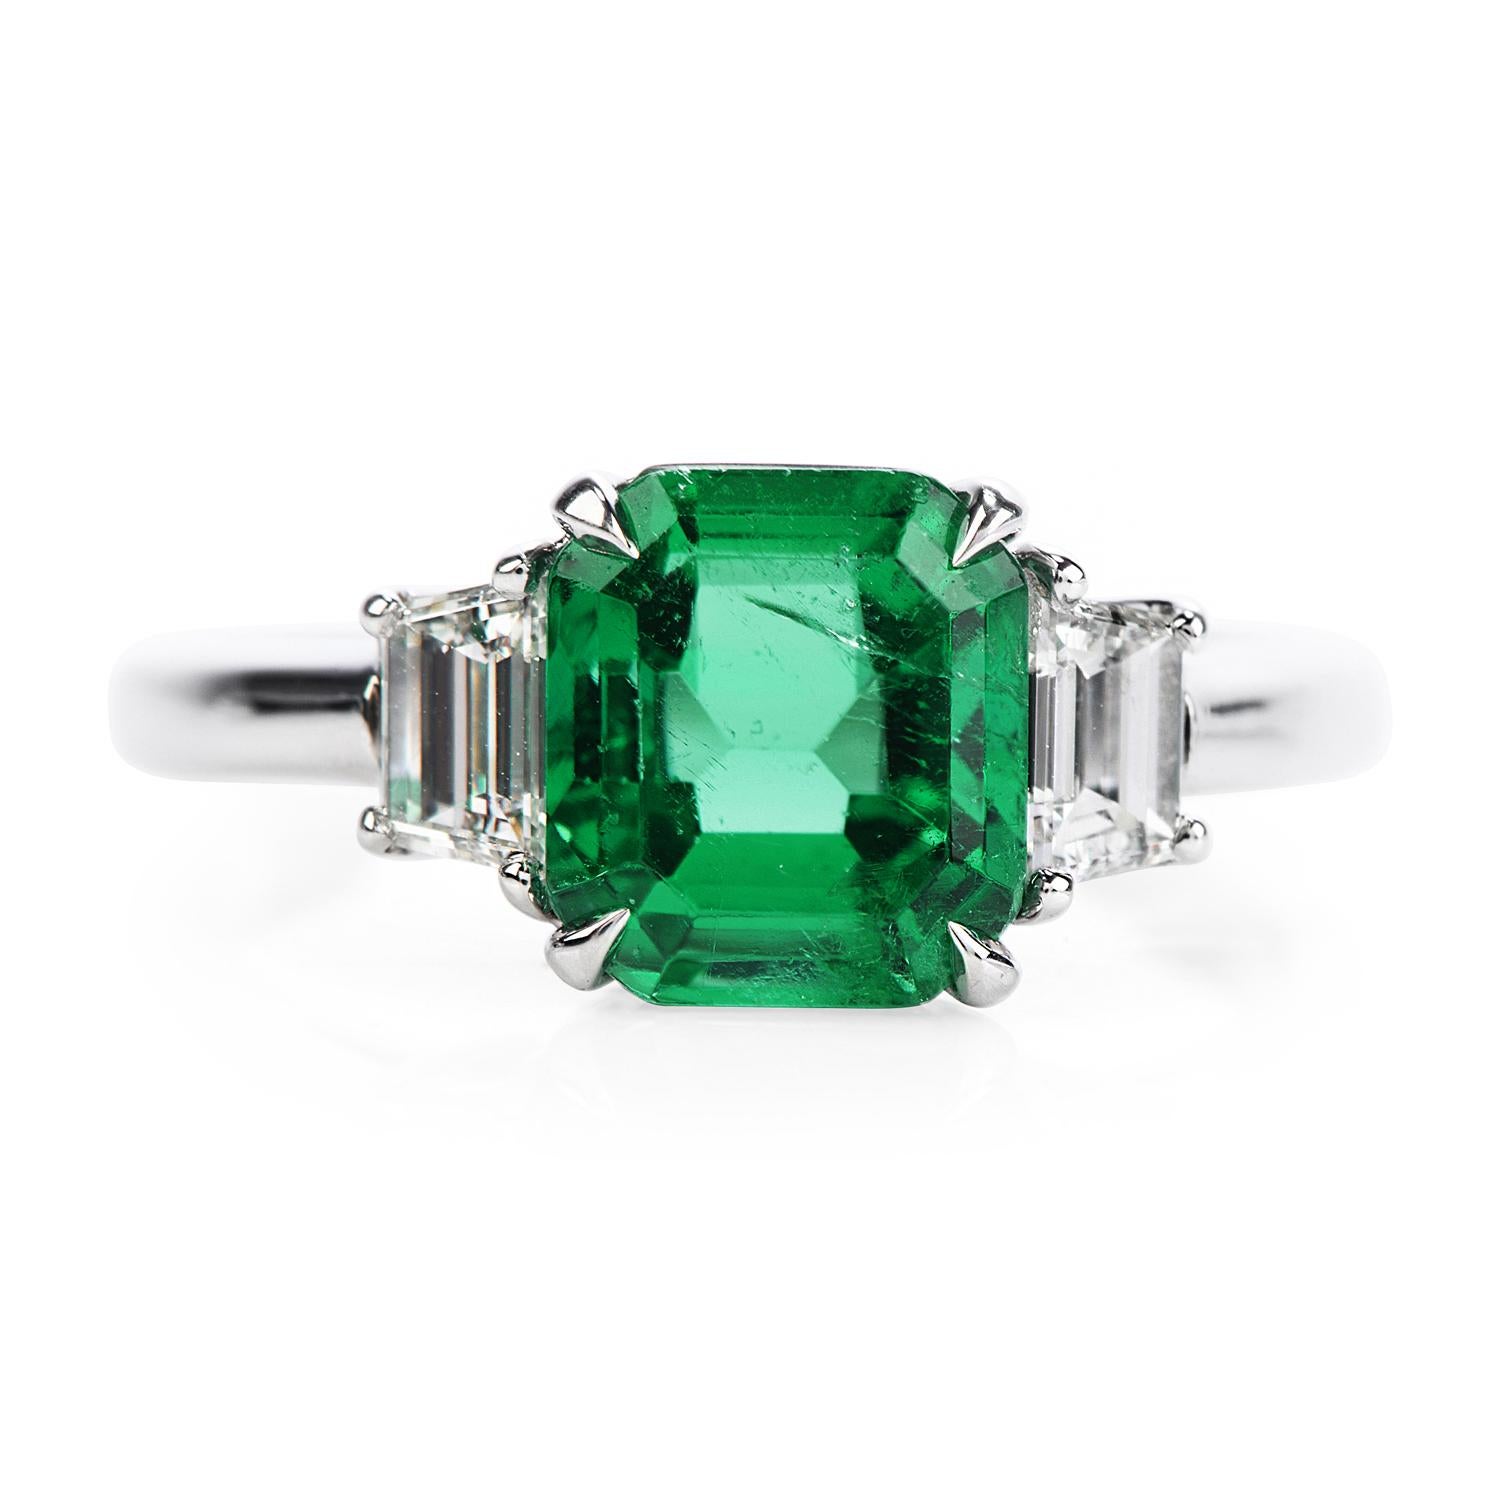 Deep green minor enhanced AGL Certified Colombian Emerald & Diamond engagement ring.

Crafted in solid platinum, the center is adorned by an Incredible AGL-certified Colombian Emerald with minor coating treatment, emerald cut, prong set, weighing